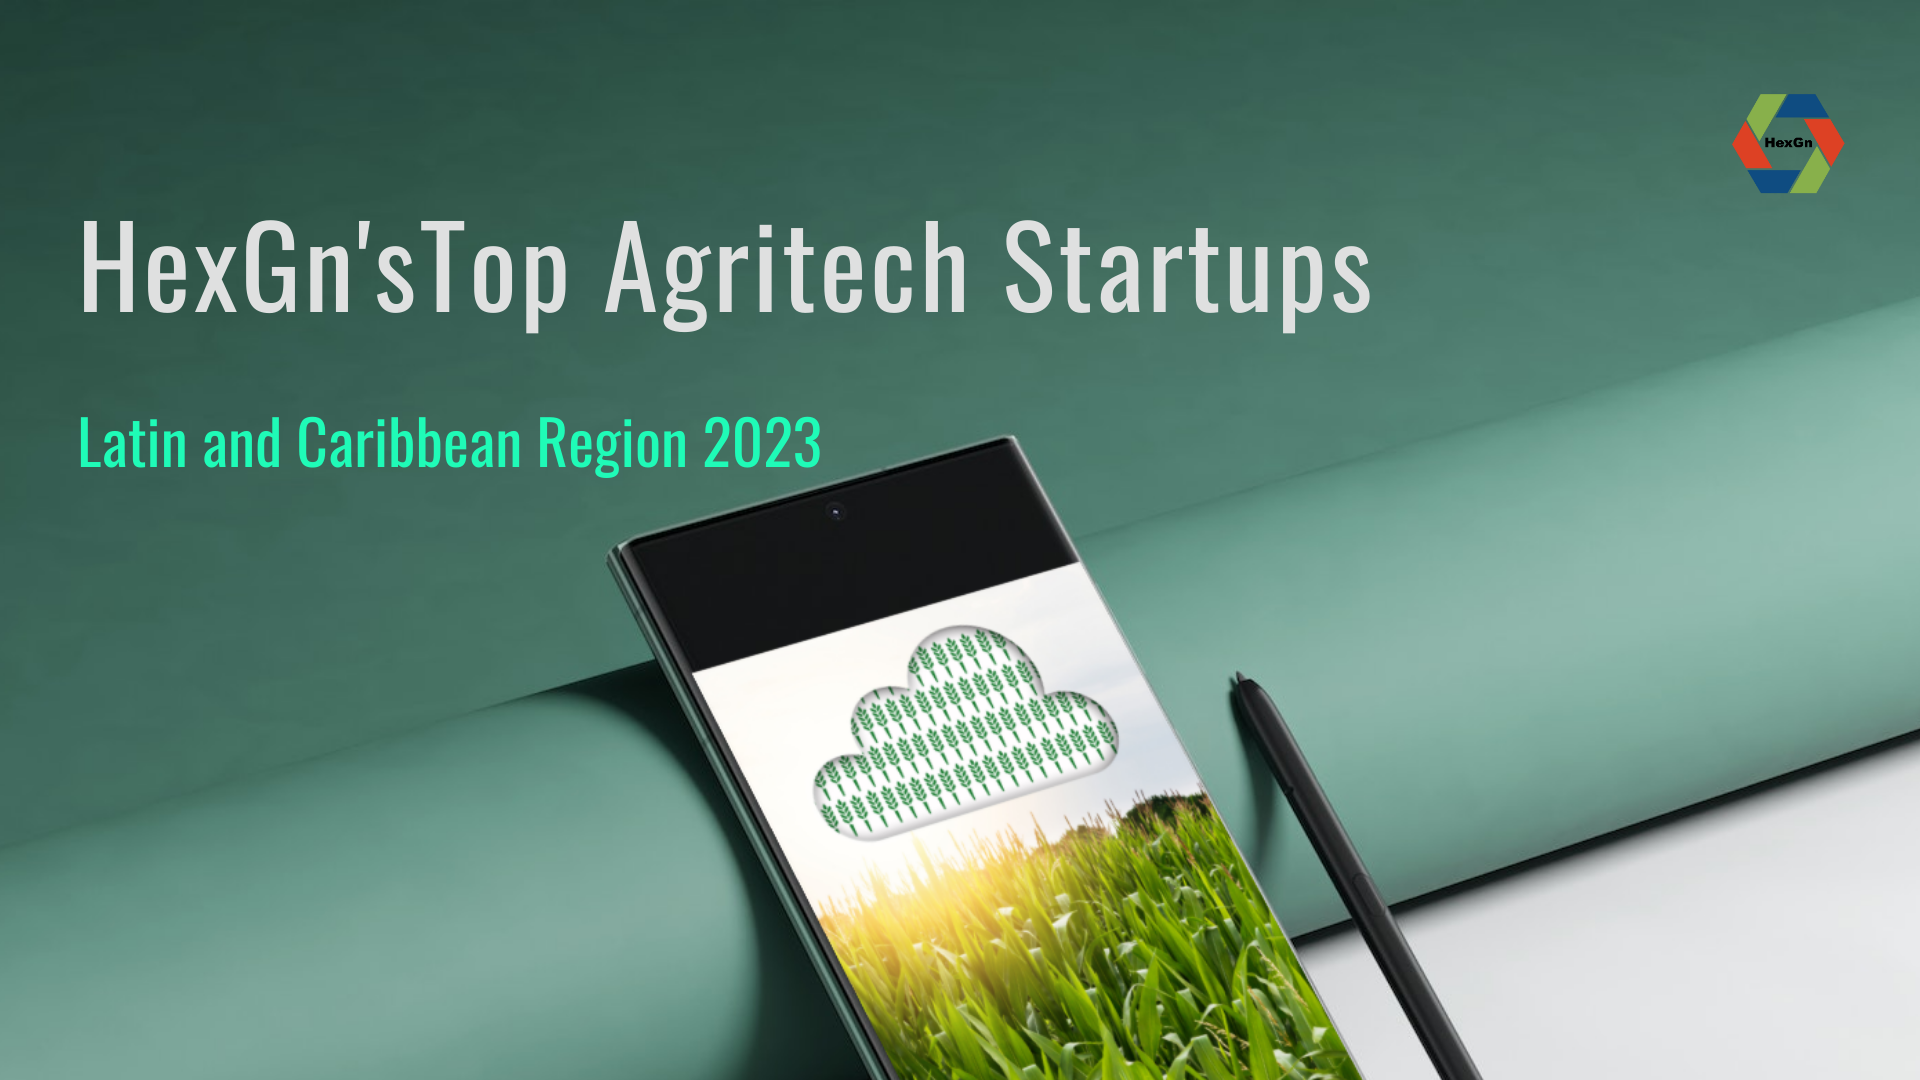 HexGn'sTop Agritech Startups Latin and Caribbean 2023